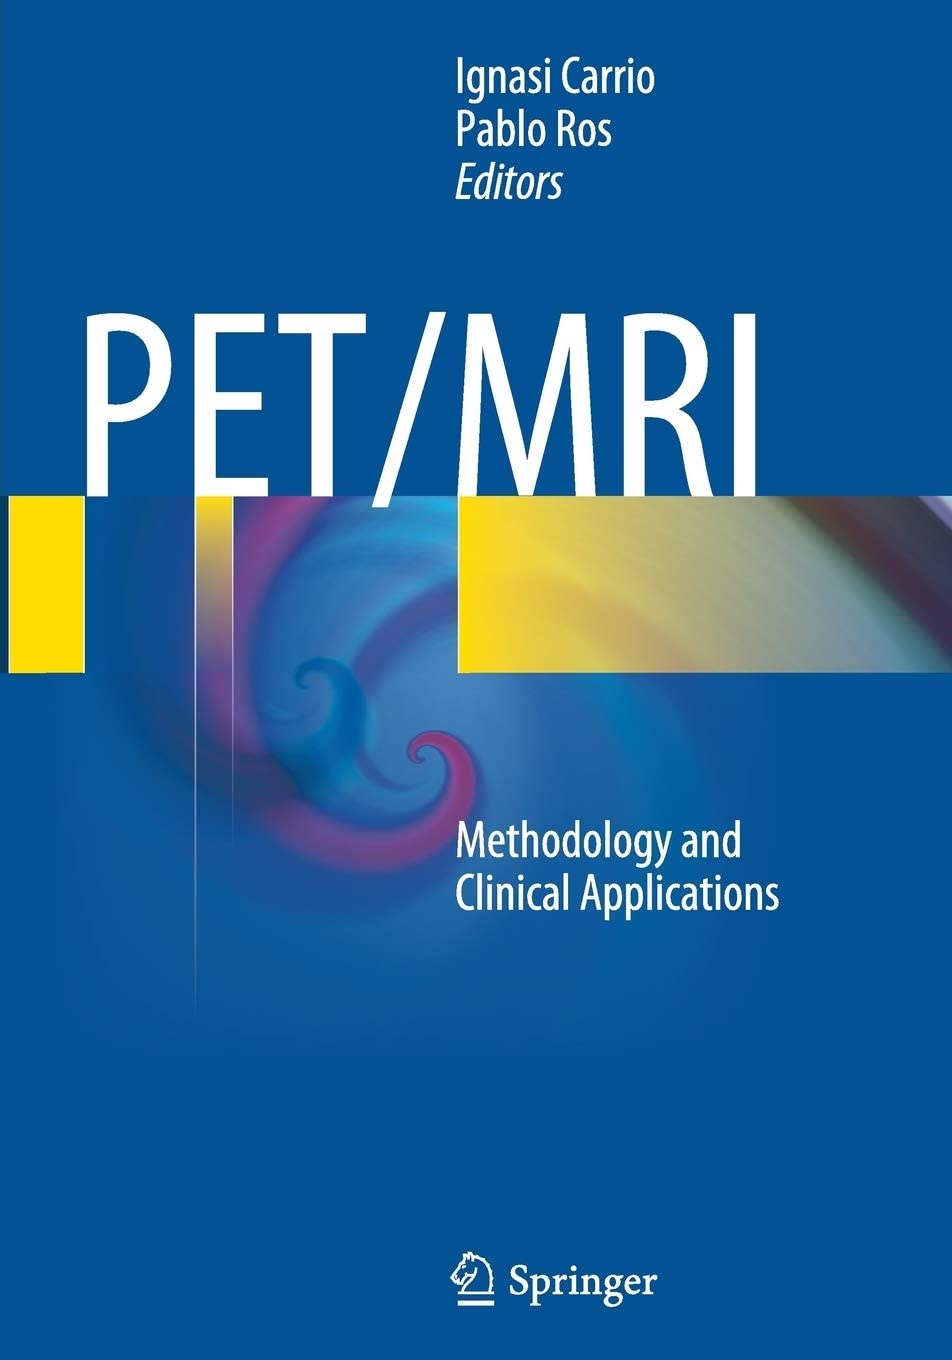 PET/MRI: Methodology and Clinical Applications